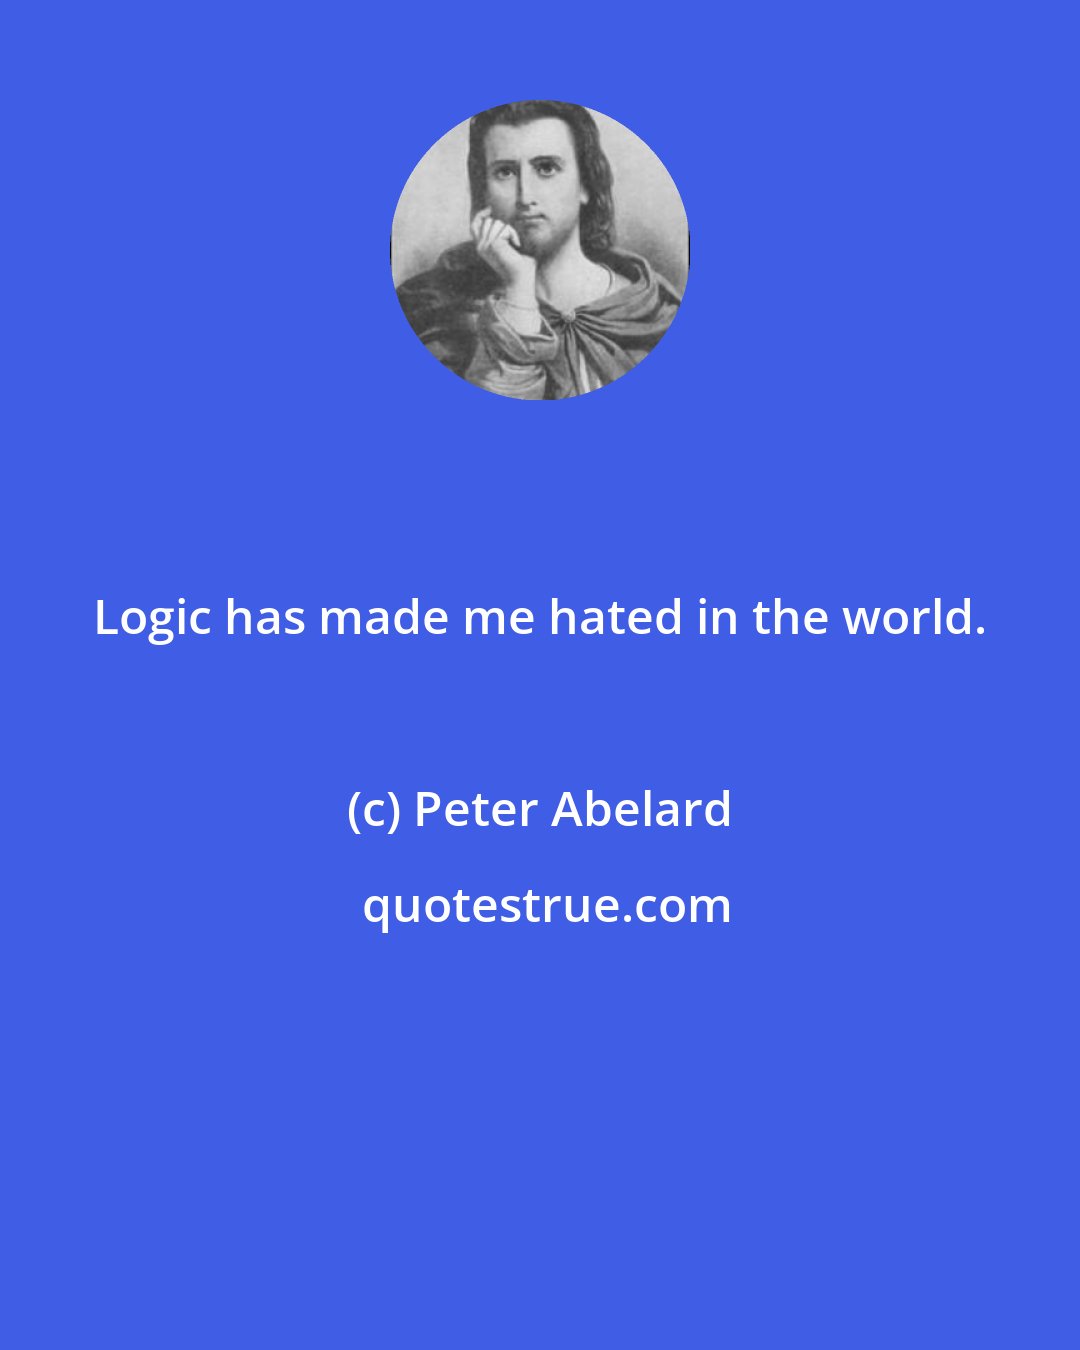 Peter Abelard: Logic has made me hated in the world.